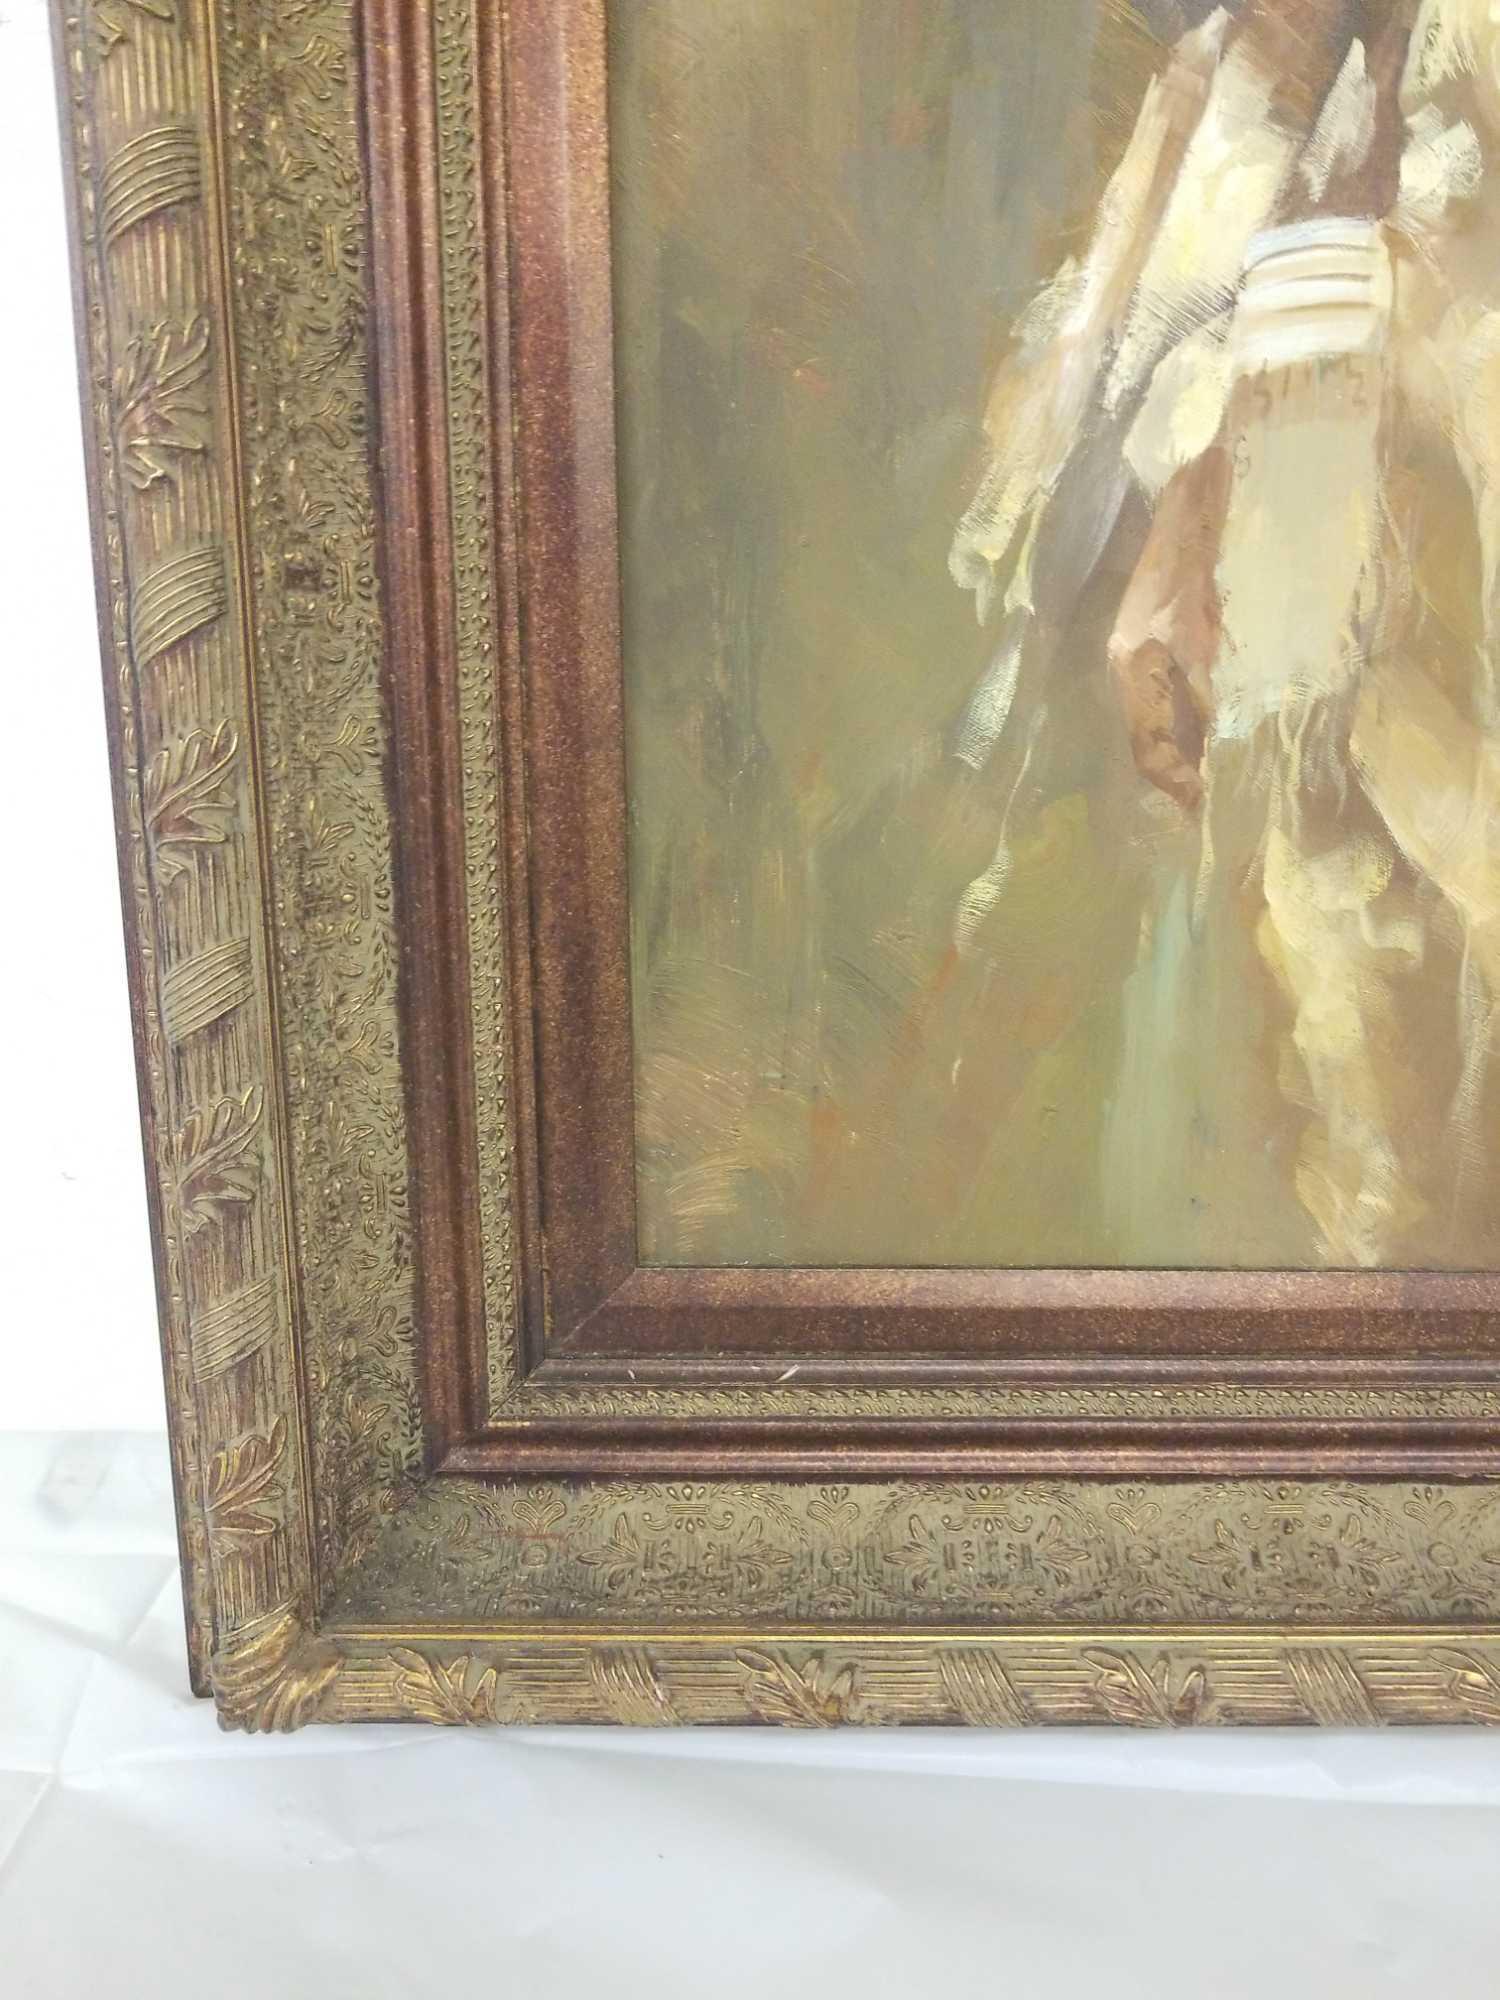 Vintage Indian themed oil painting in excellent condition. Includes Verno certificate of